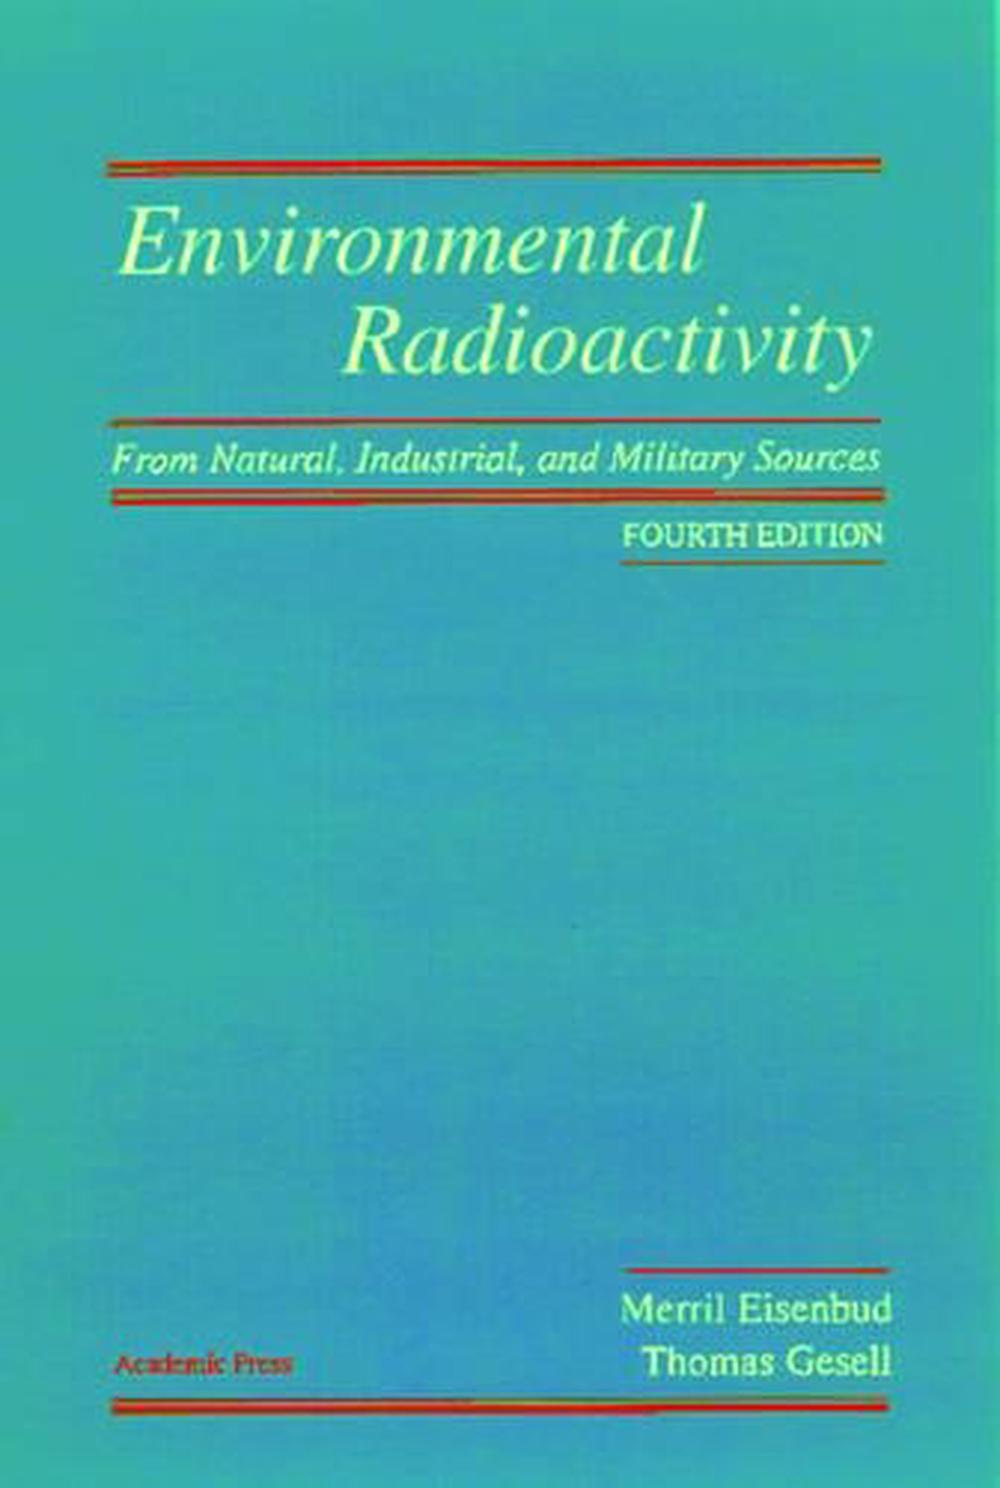 Environmental Radioactivity from Natural, Industrial & Military Sources